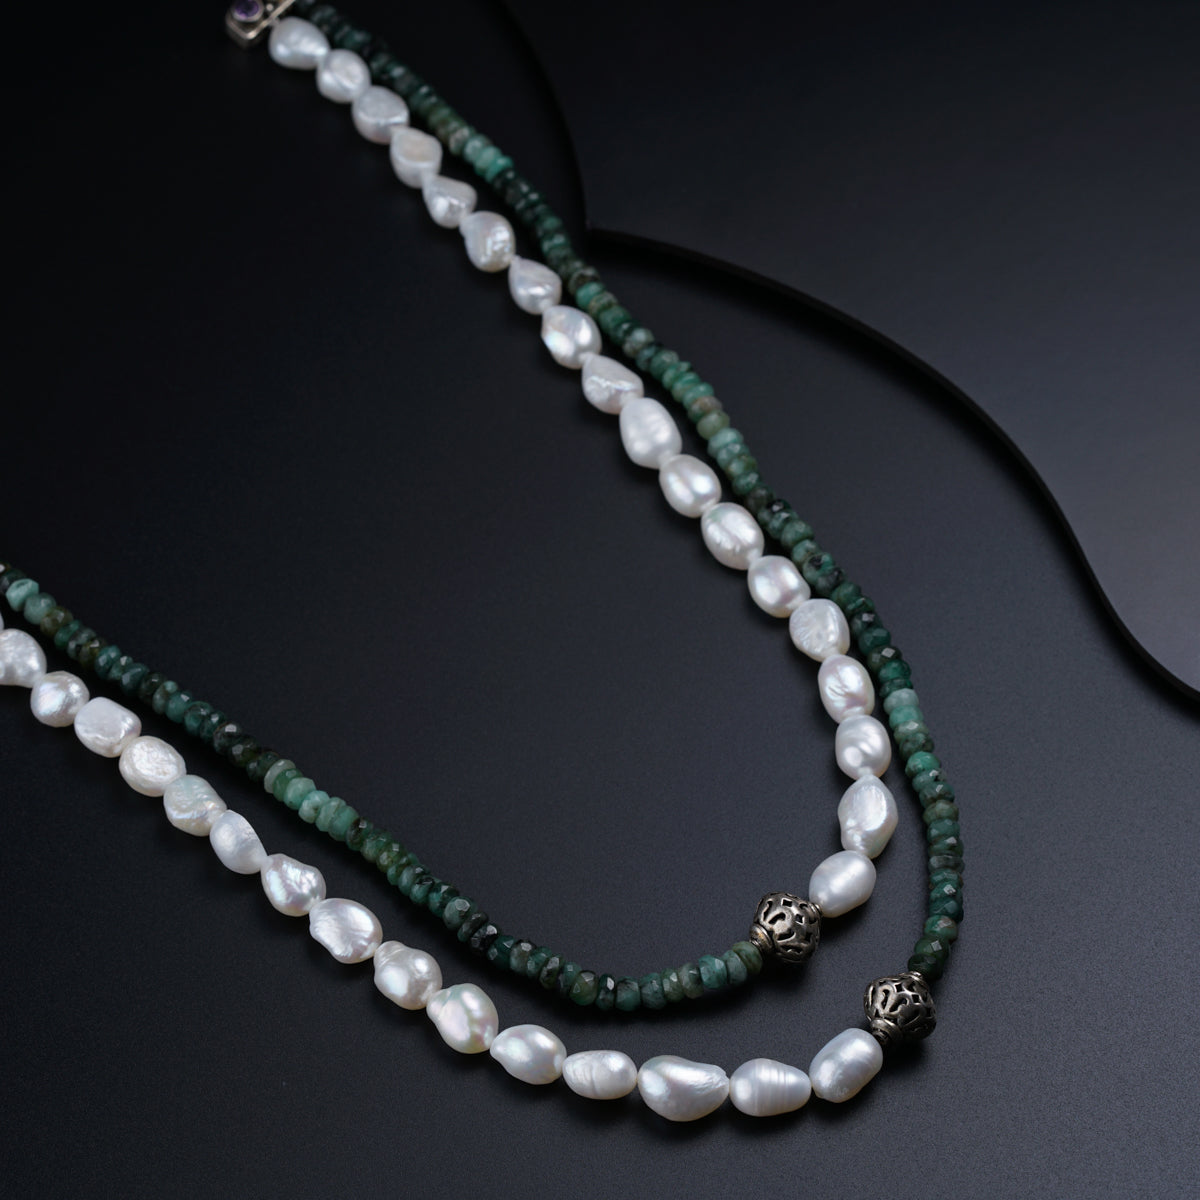 a long necklace with pearls and green beads